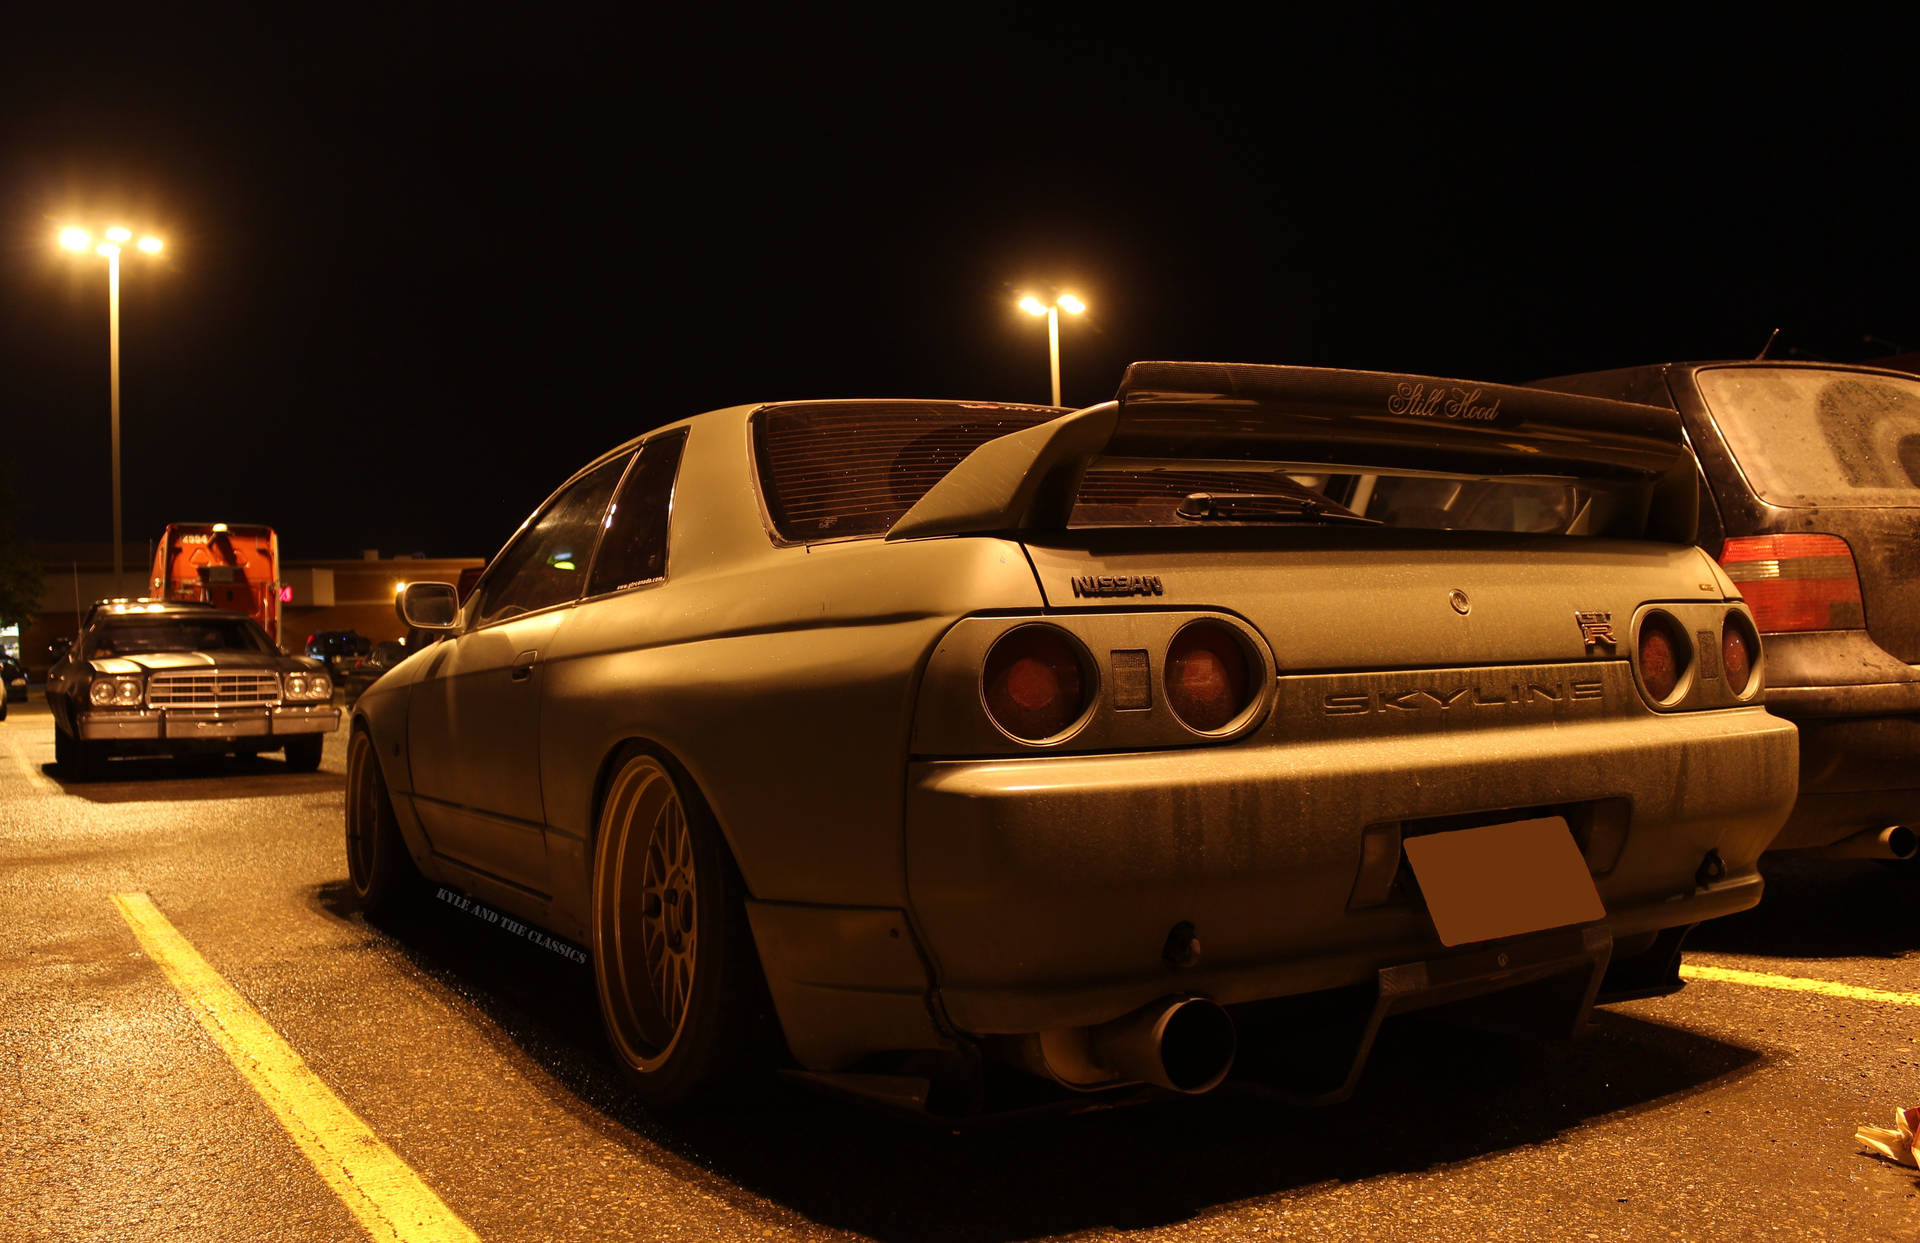 Caption: Breathtaking View Of Classic Skyline R32 In The Wild Wallpaper